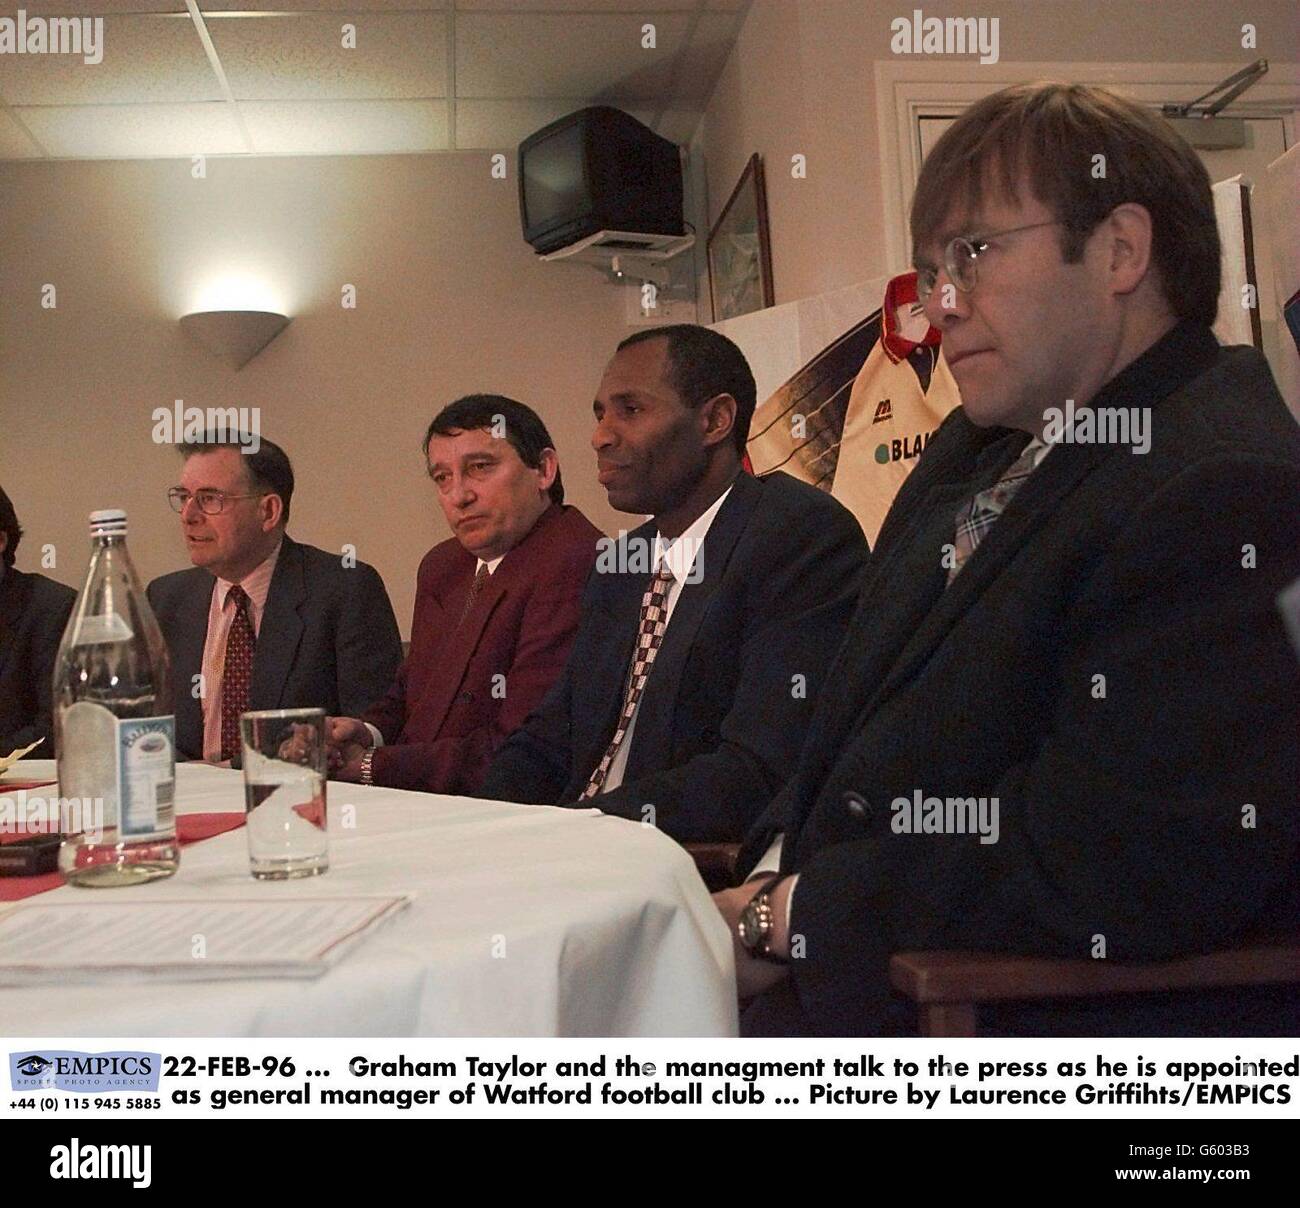 22-FEB-96. Graham Taylor (second left), Luther Blissett (second right) and Chairman Elton John (right) talk to the press, as Taylor is appointed as General Manager of Watford Football Club. Picture by Laurence Griffiths/EMPICS Stock Photo